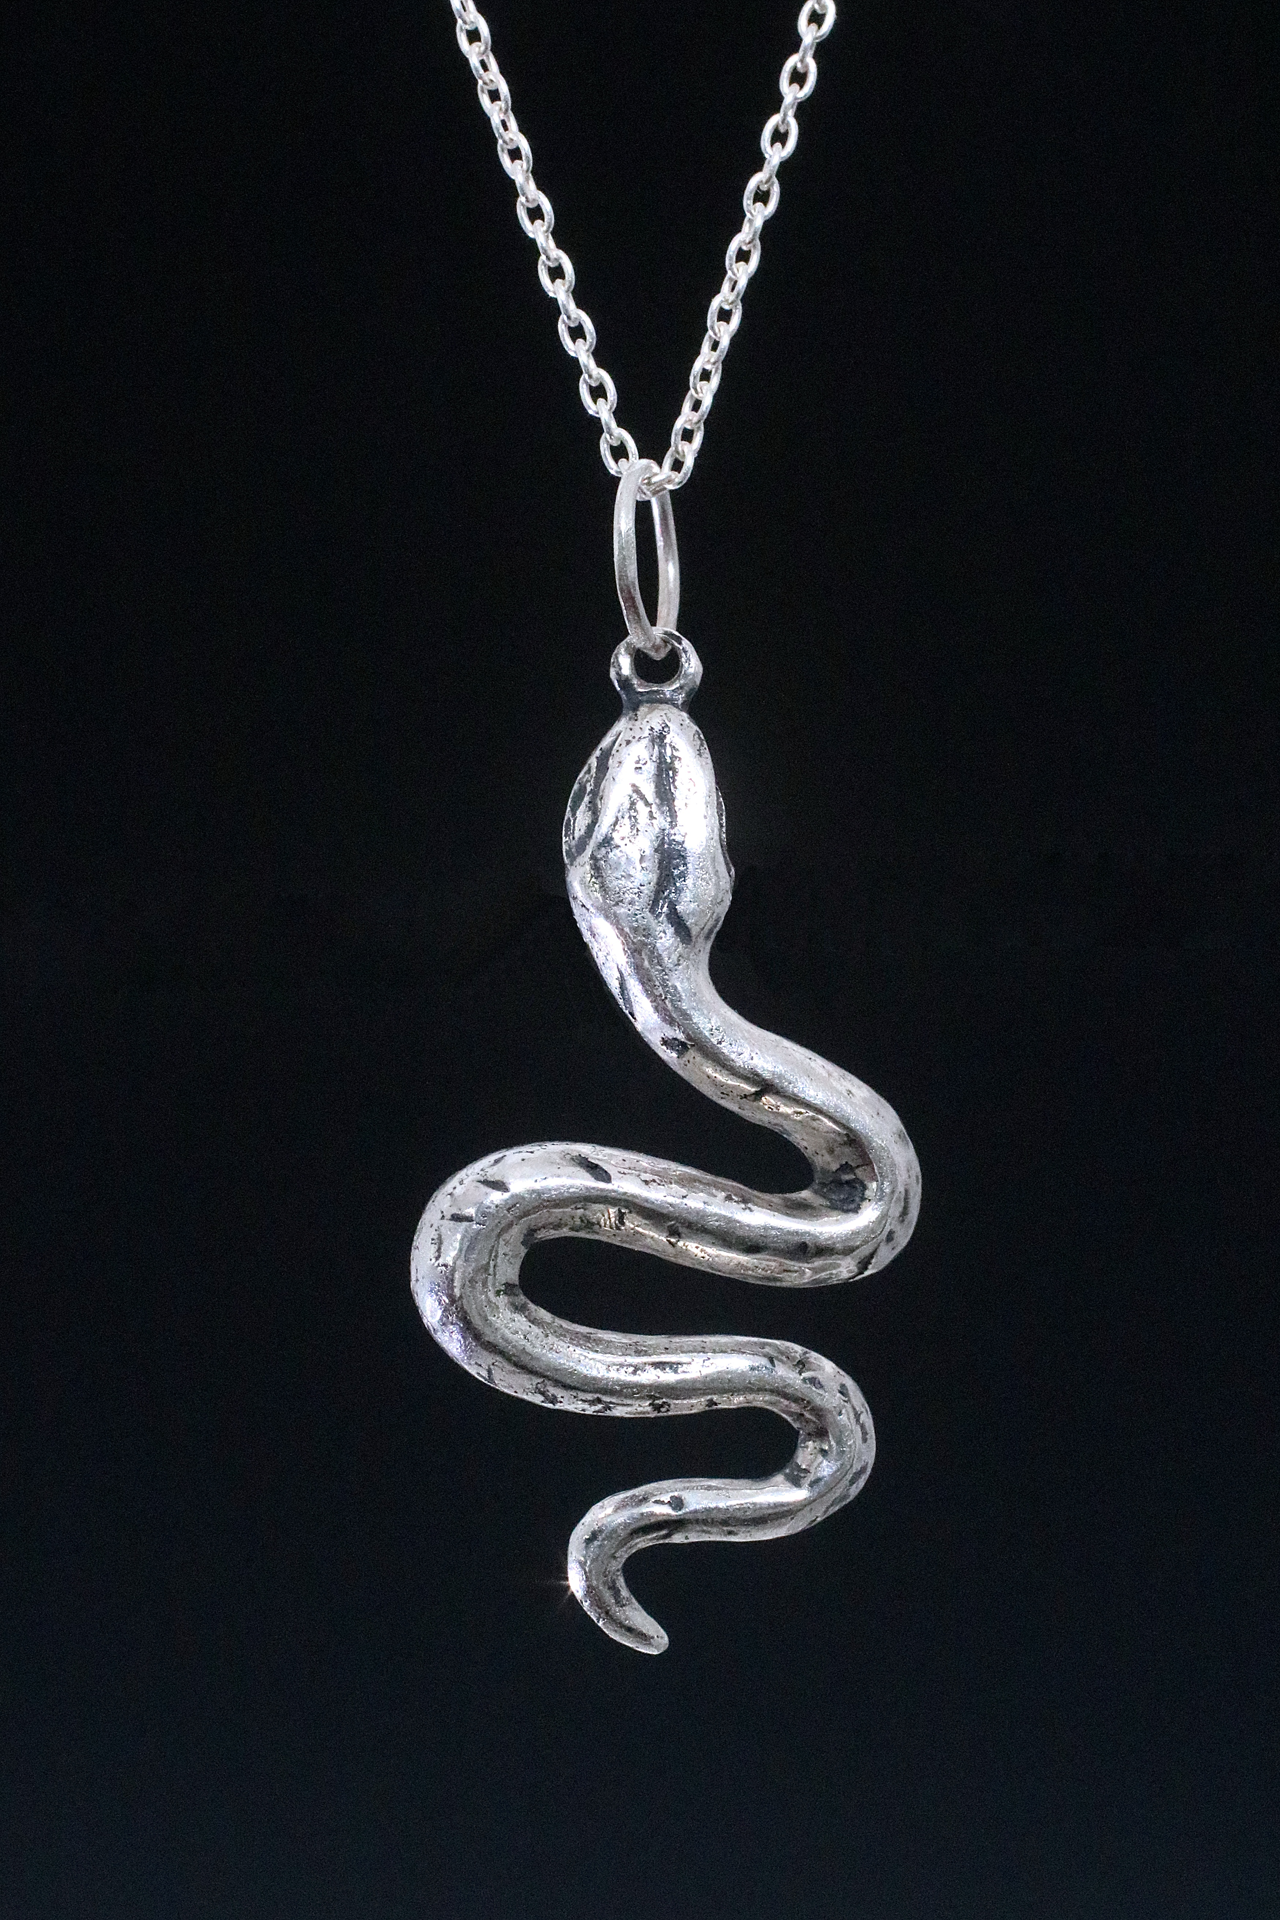 Sterling Silver Ouroboros Snake Charm 18x12mm - Necklace -  FashionJunkie4Life